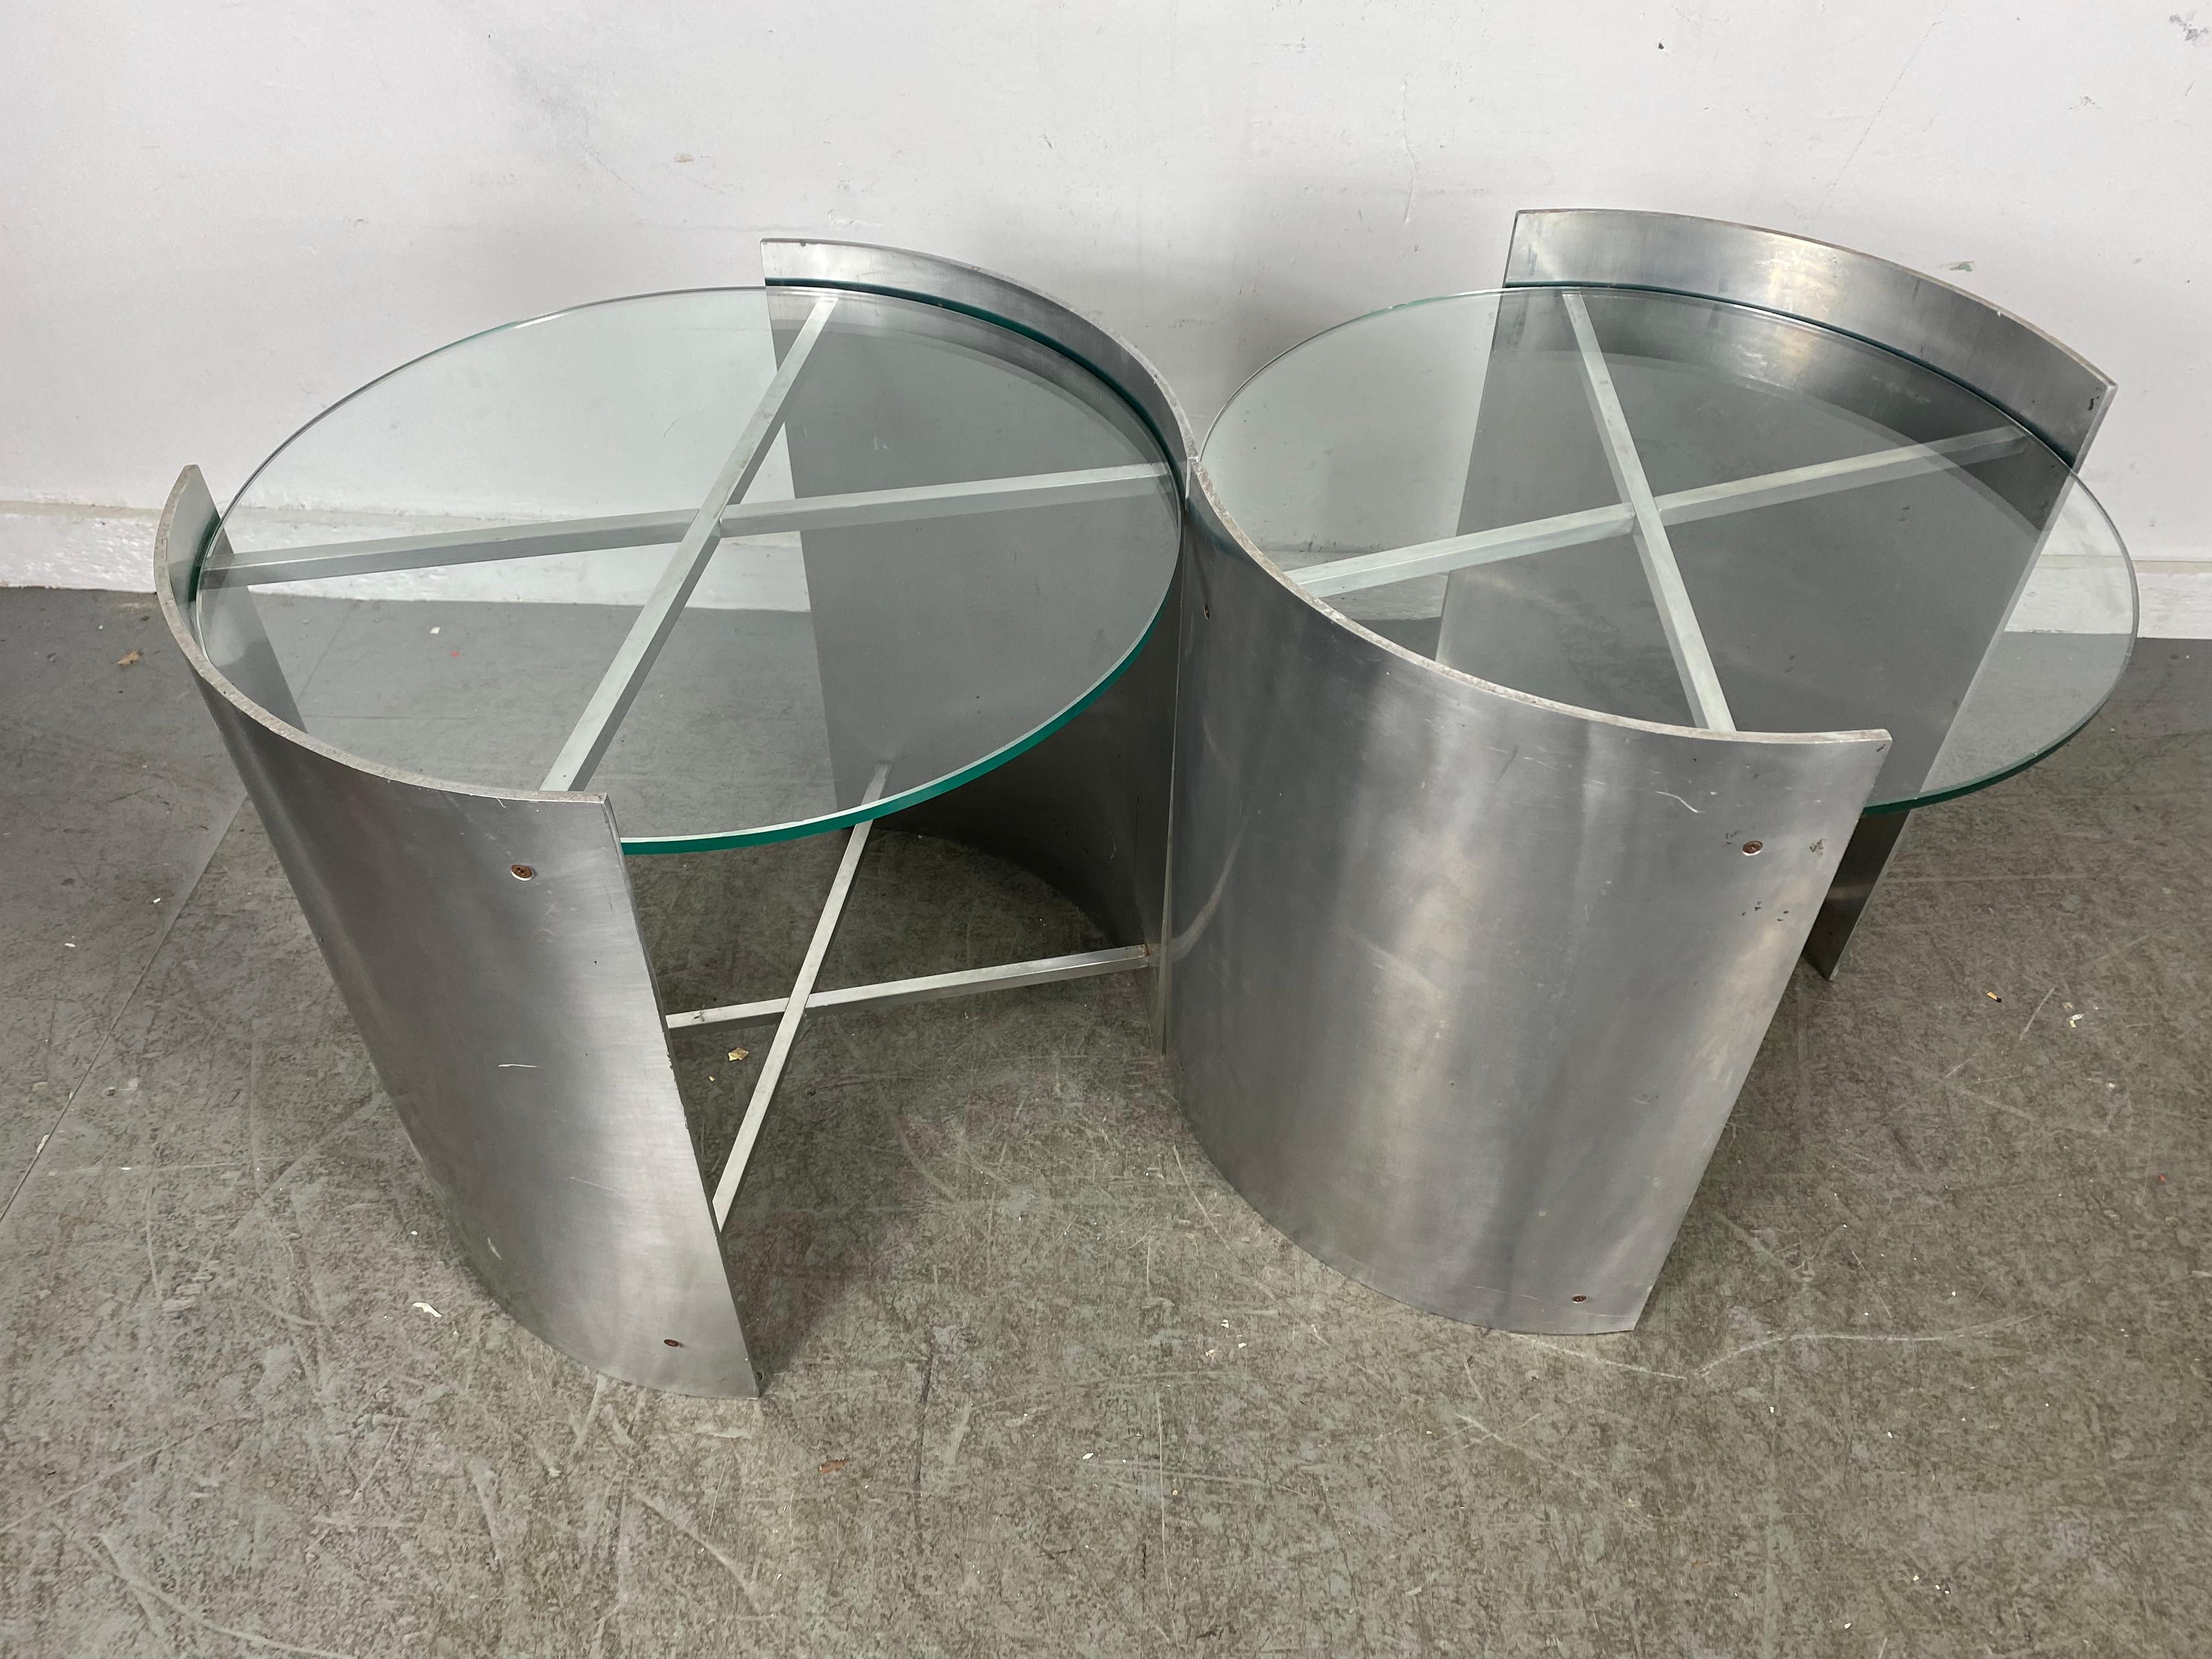 Post Modernist / Art Deco Style  Aluminum and Glass Tables In Good Condition For Sale In Buffalo, NY